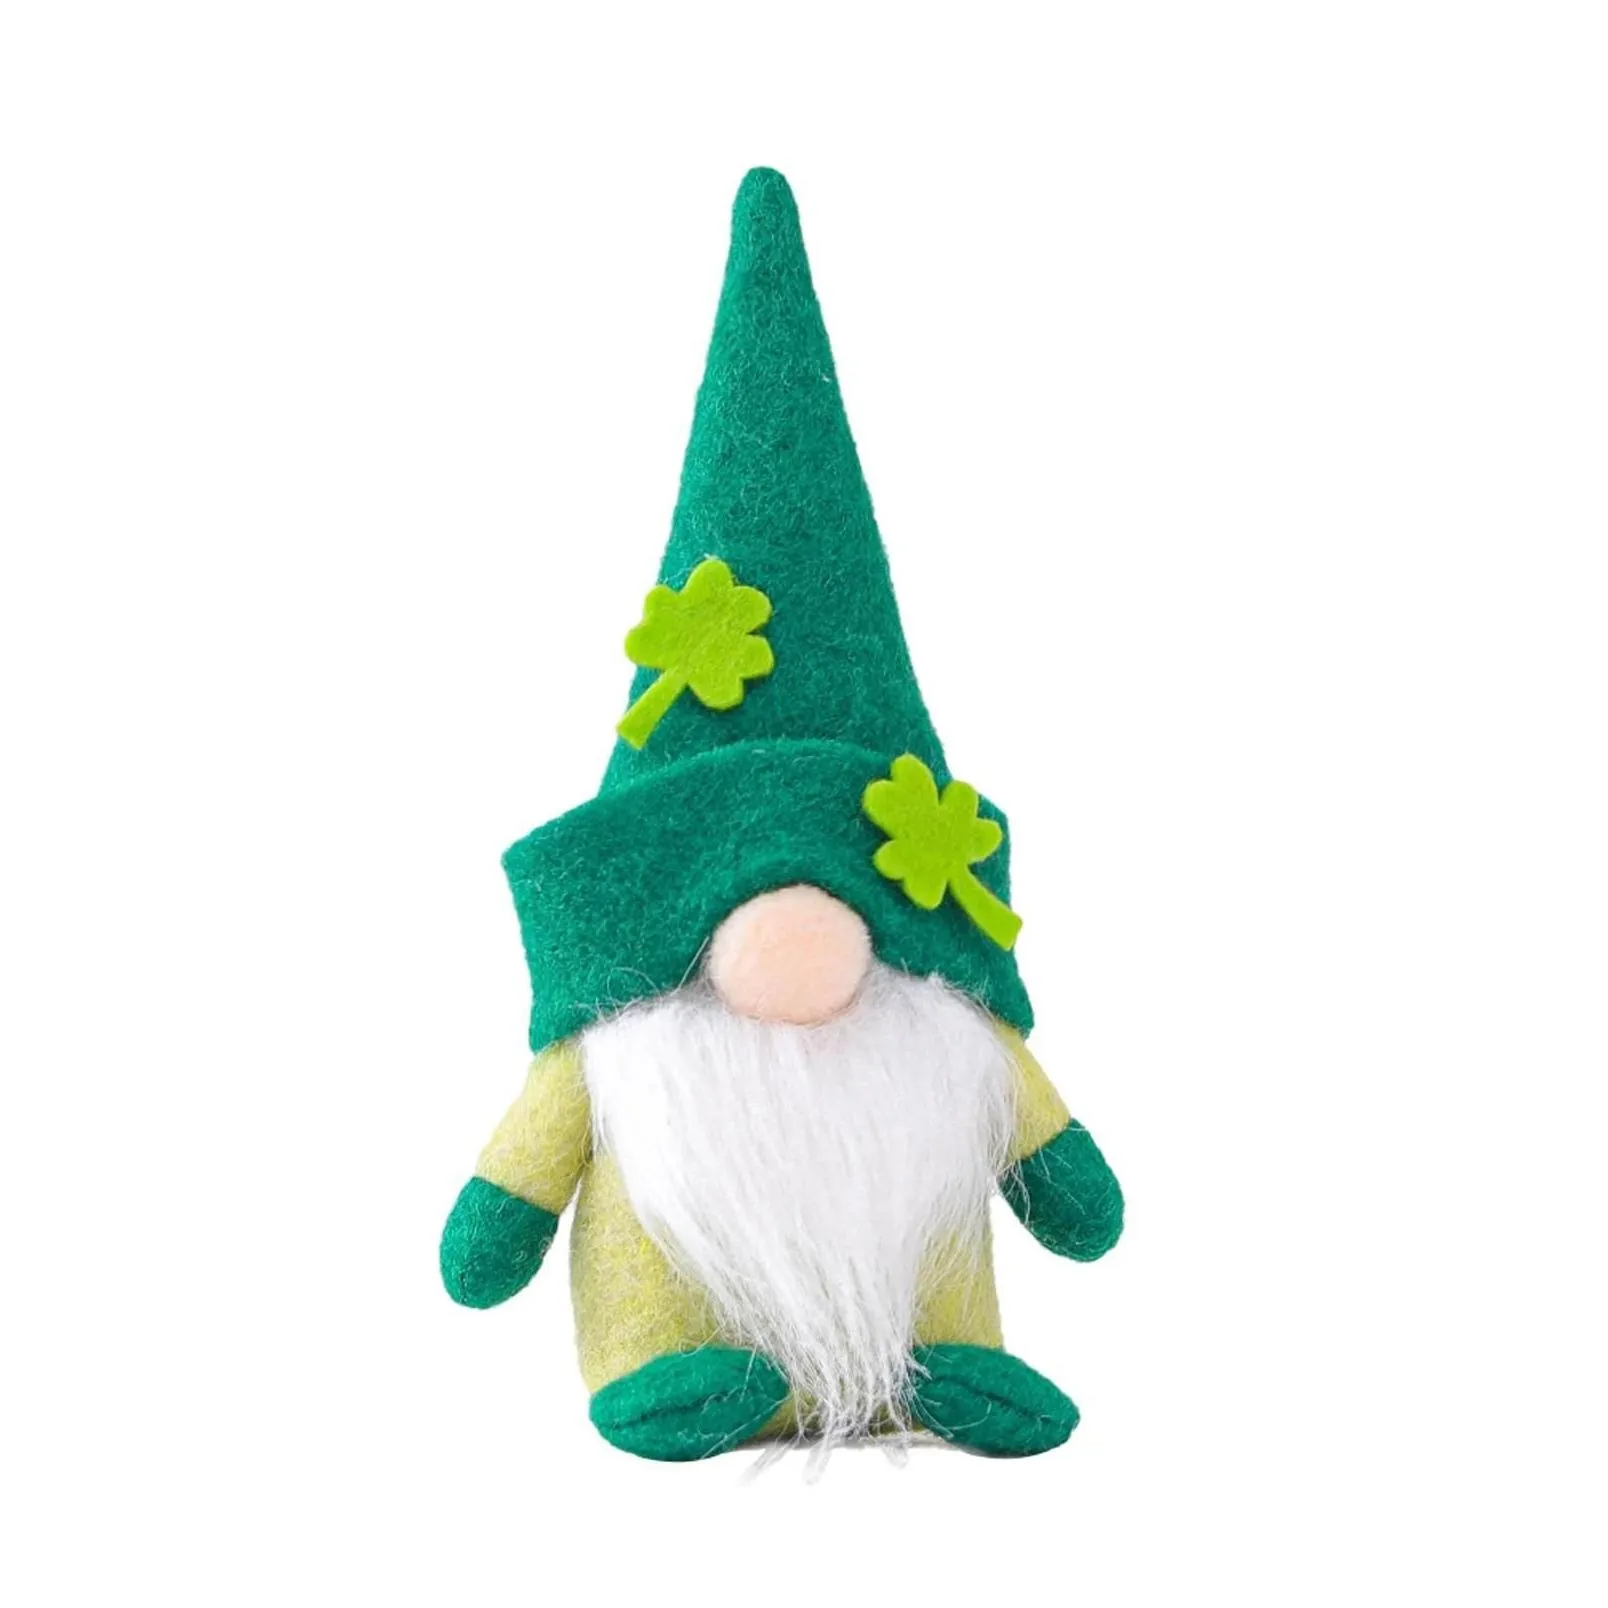 st patricks day tomte gnome faceless plush doll irish festival lucky clover bunny plush dwarf day easter decor gifts cpa4456